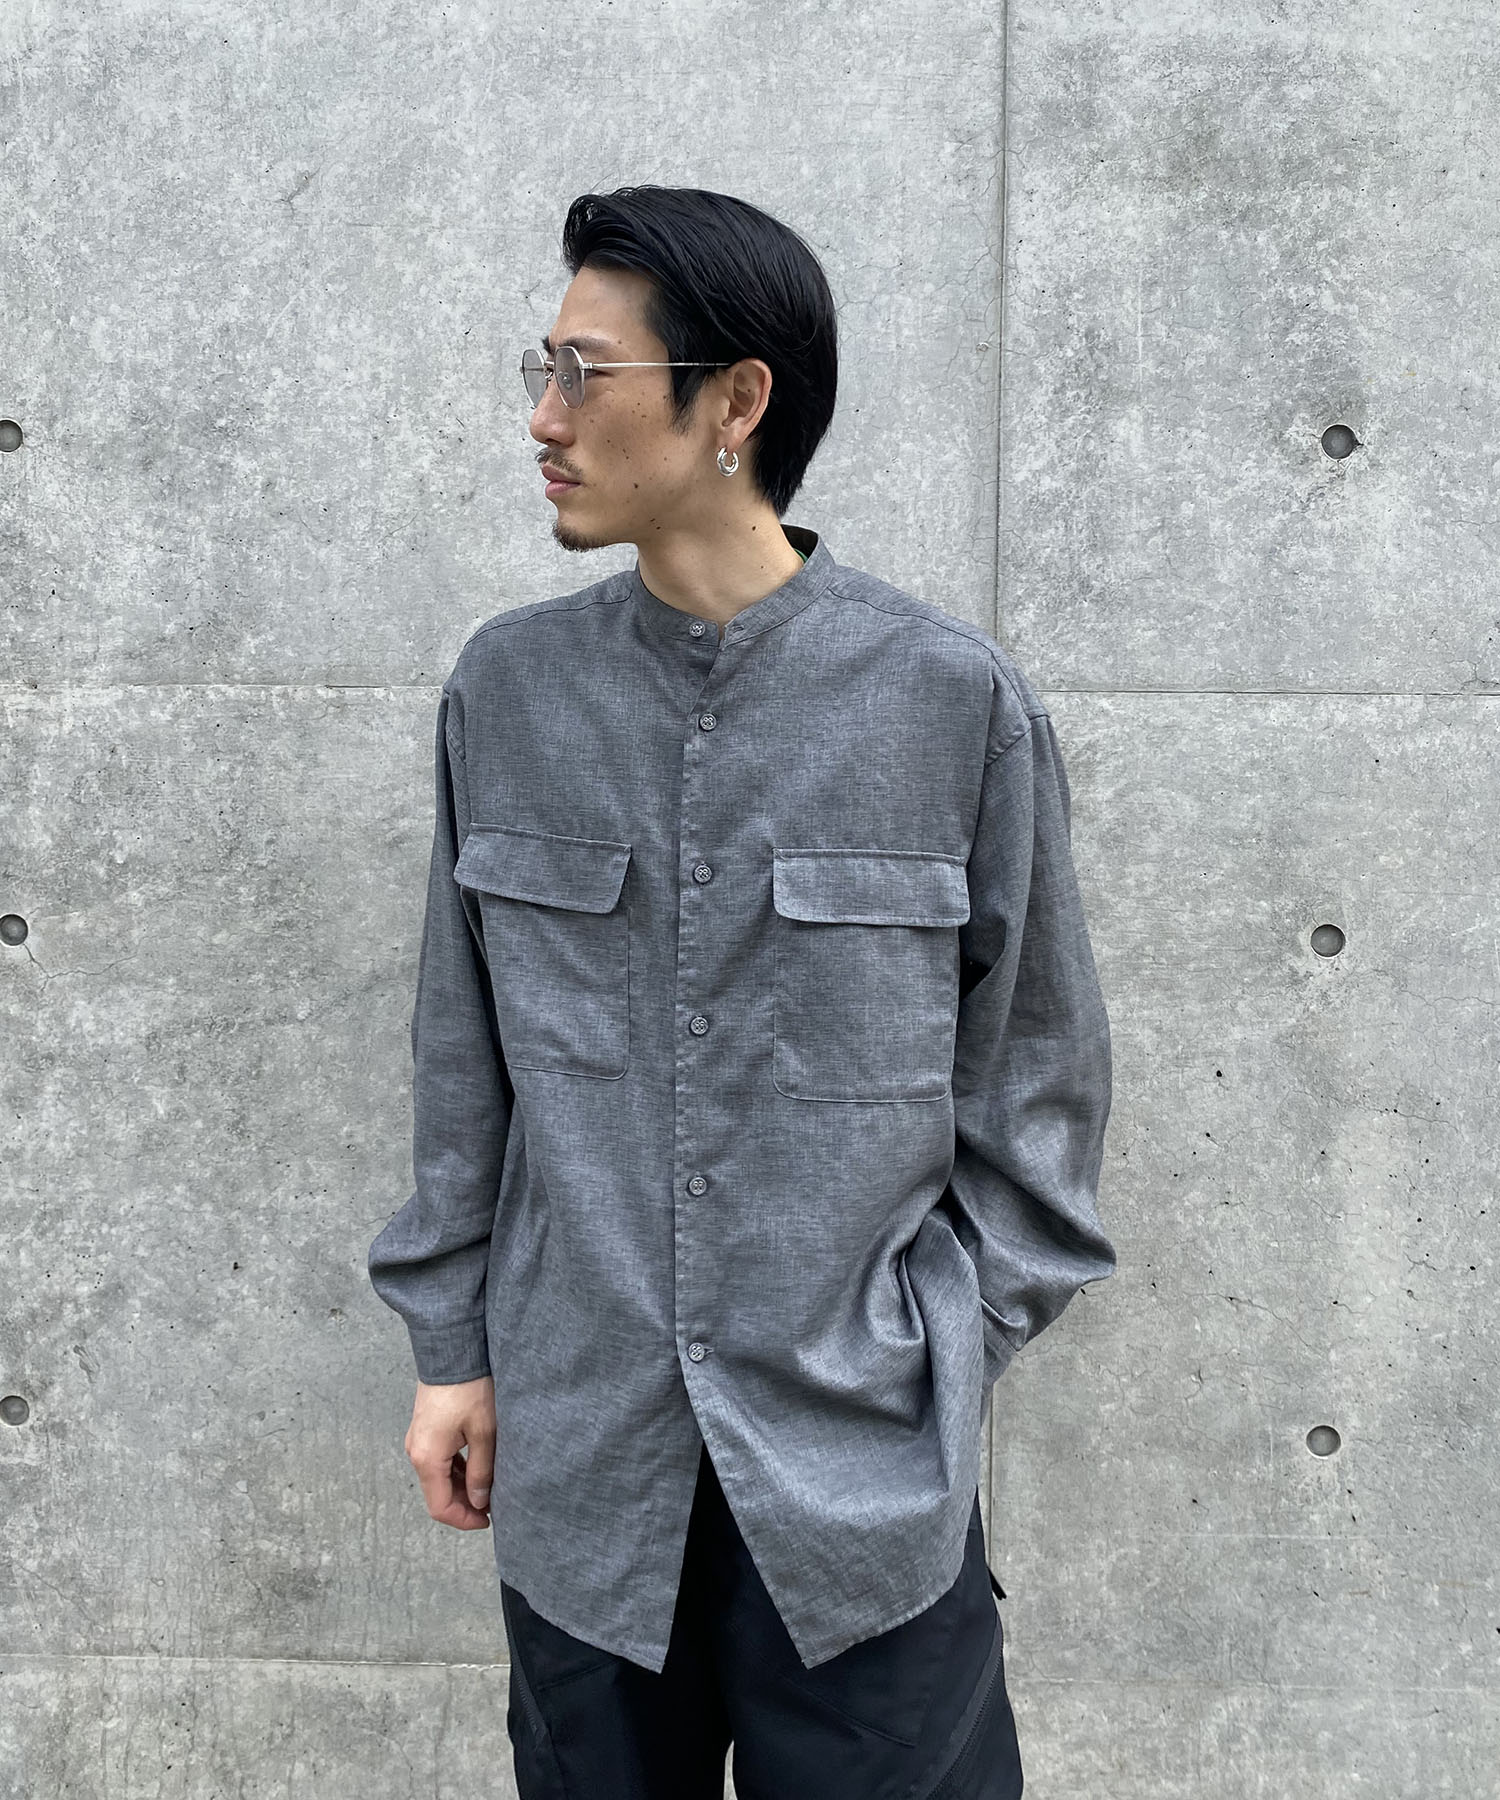 BAND COLLAR L/S SHIRT White Mountaineering